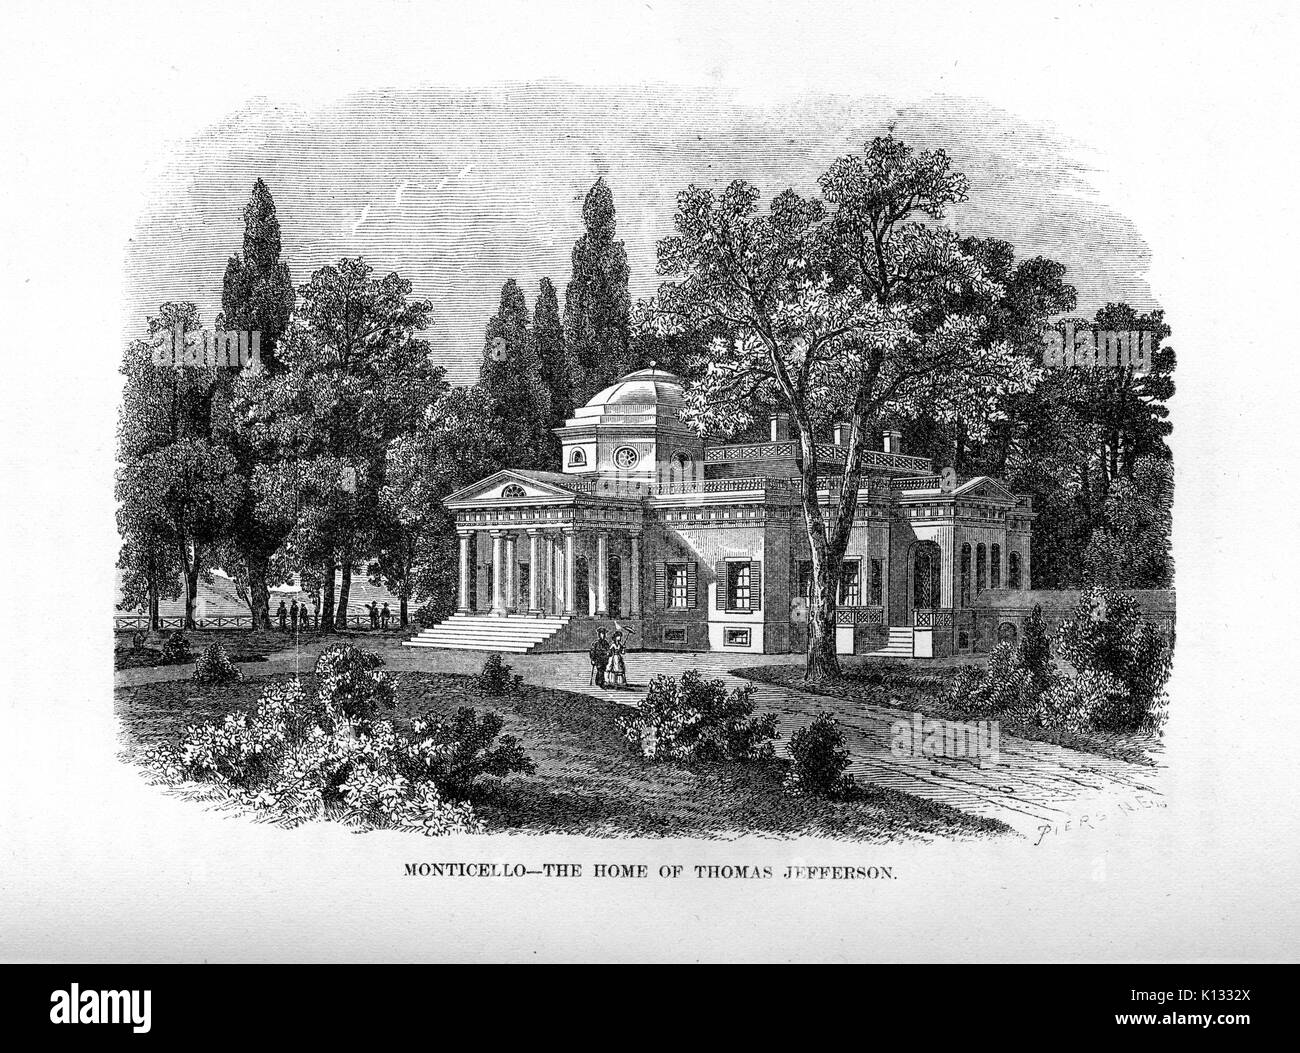 Monticello, the home of United States President Thomas Jefferson, engraving depicting the mansion and domed roof set among trees at the end of a driveway, people visible strolling through the grounds, 1819. Stock Photo